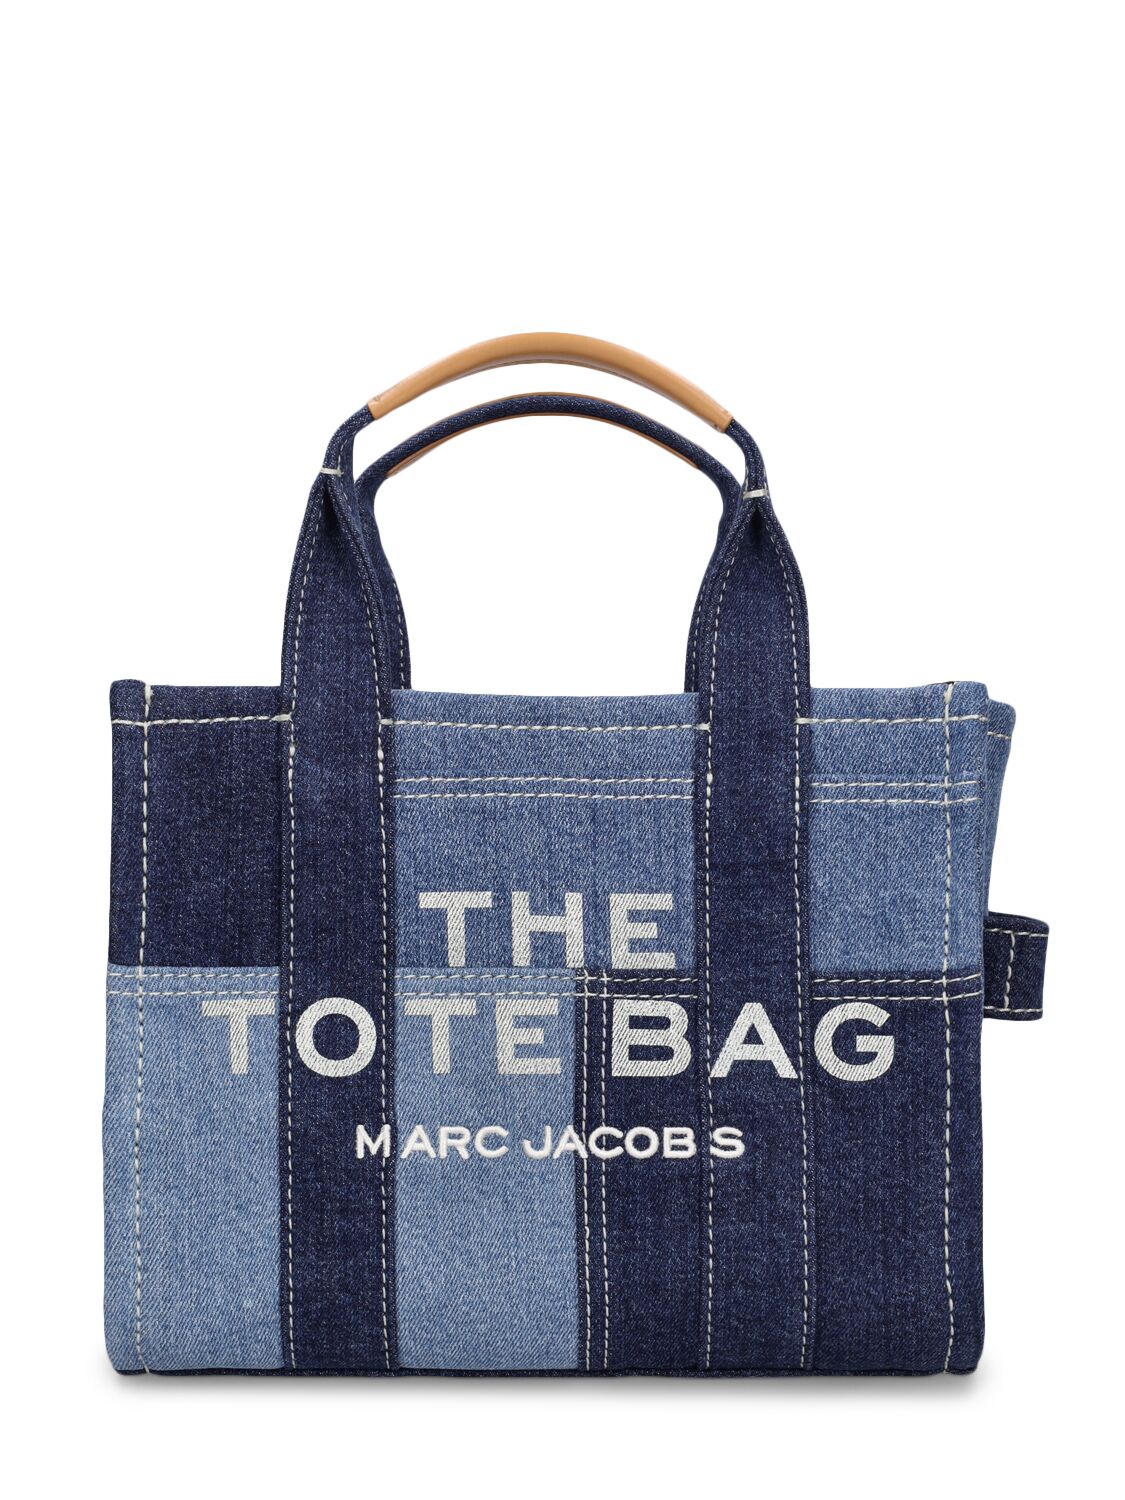 Image of The Small Tote Denim Patches Bag